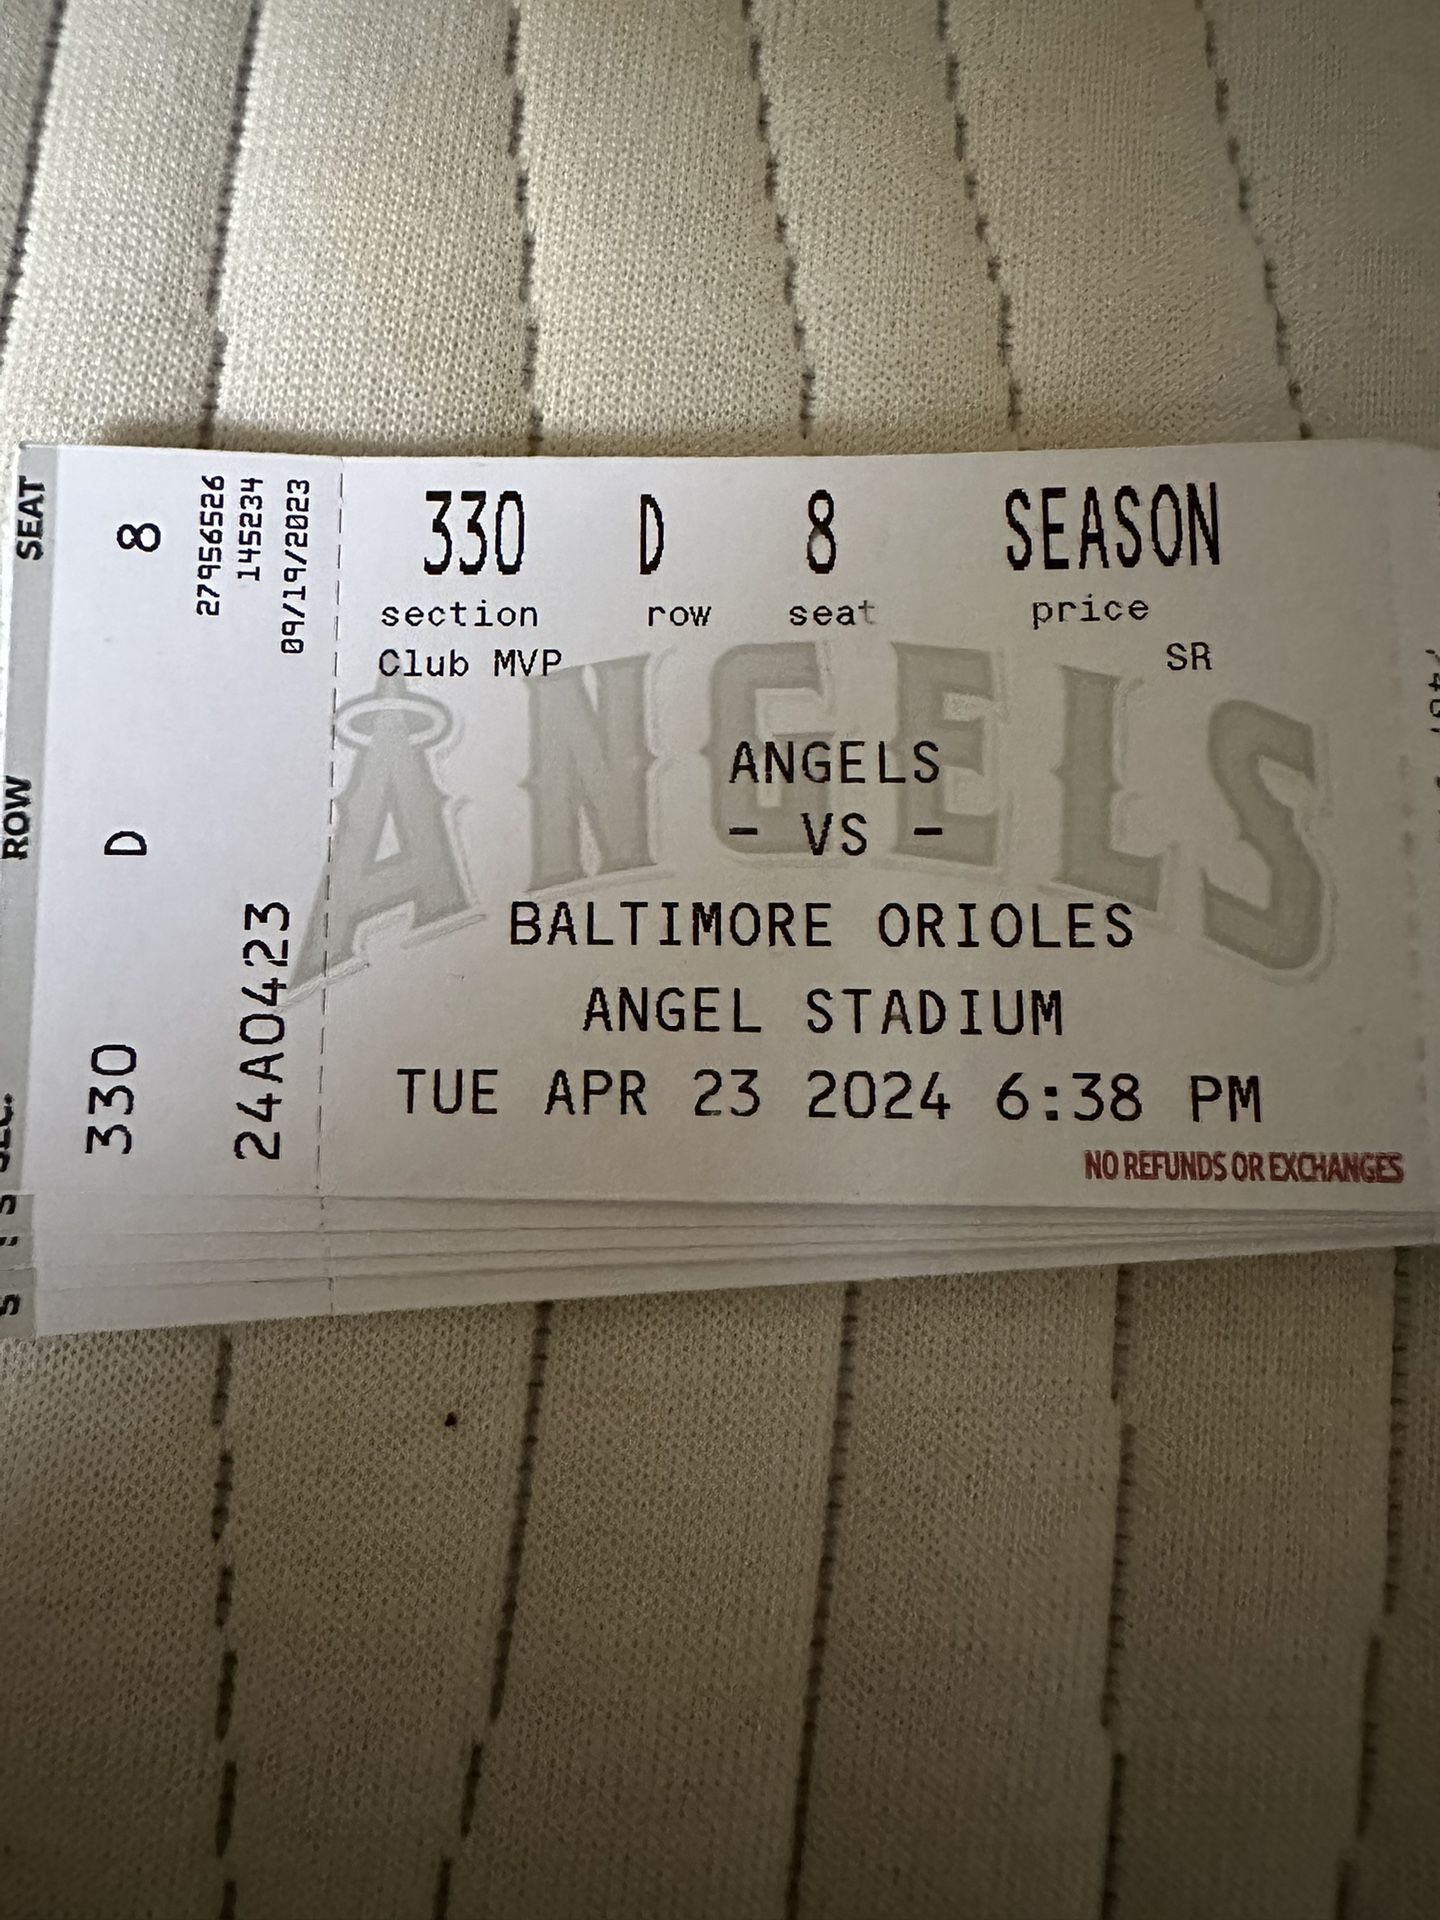 Orioles Vs Angels (4 Tickets Plus Parking) Todays Game 04/23/24